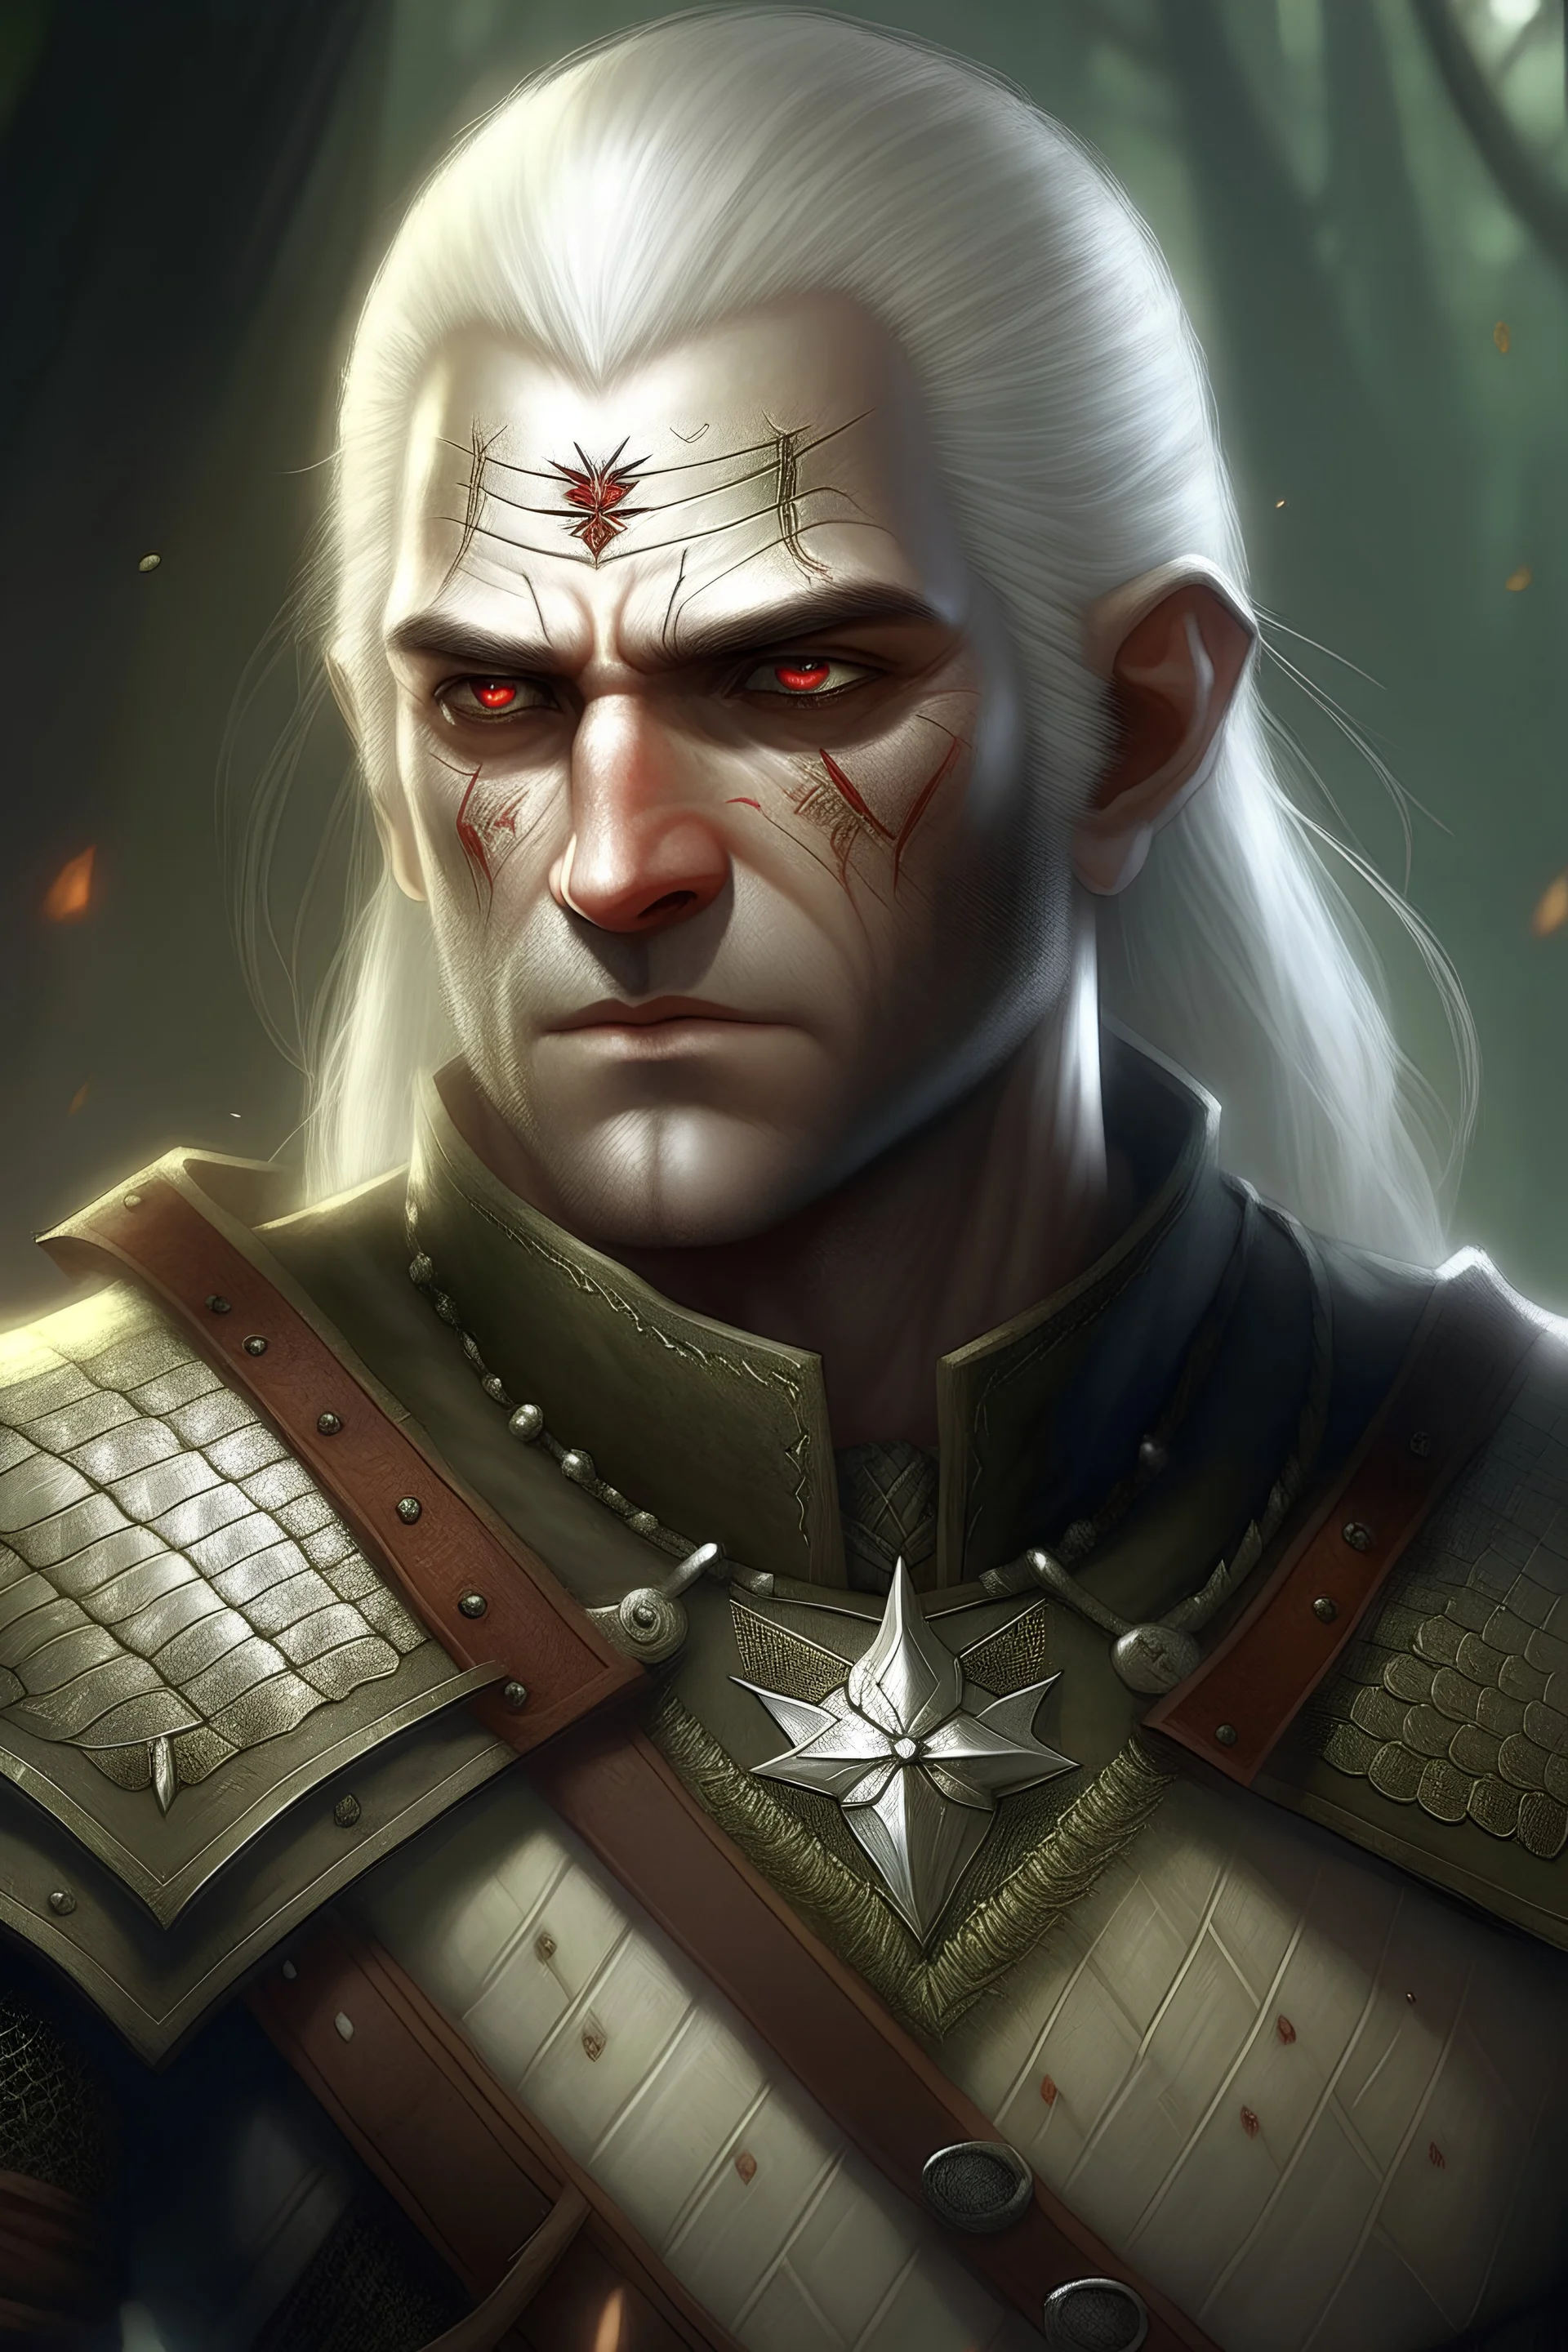 white hair, witcher, light armor, 2 swords, scars, witcher eyes, young